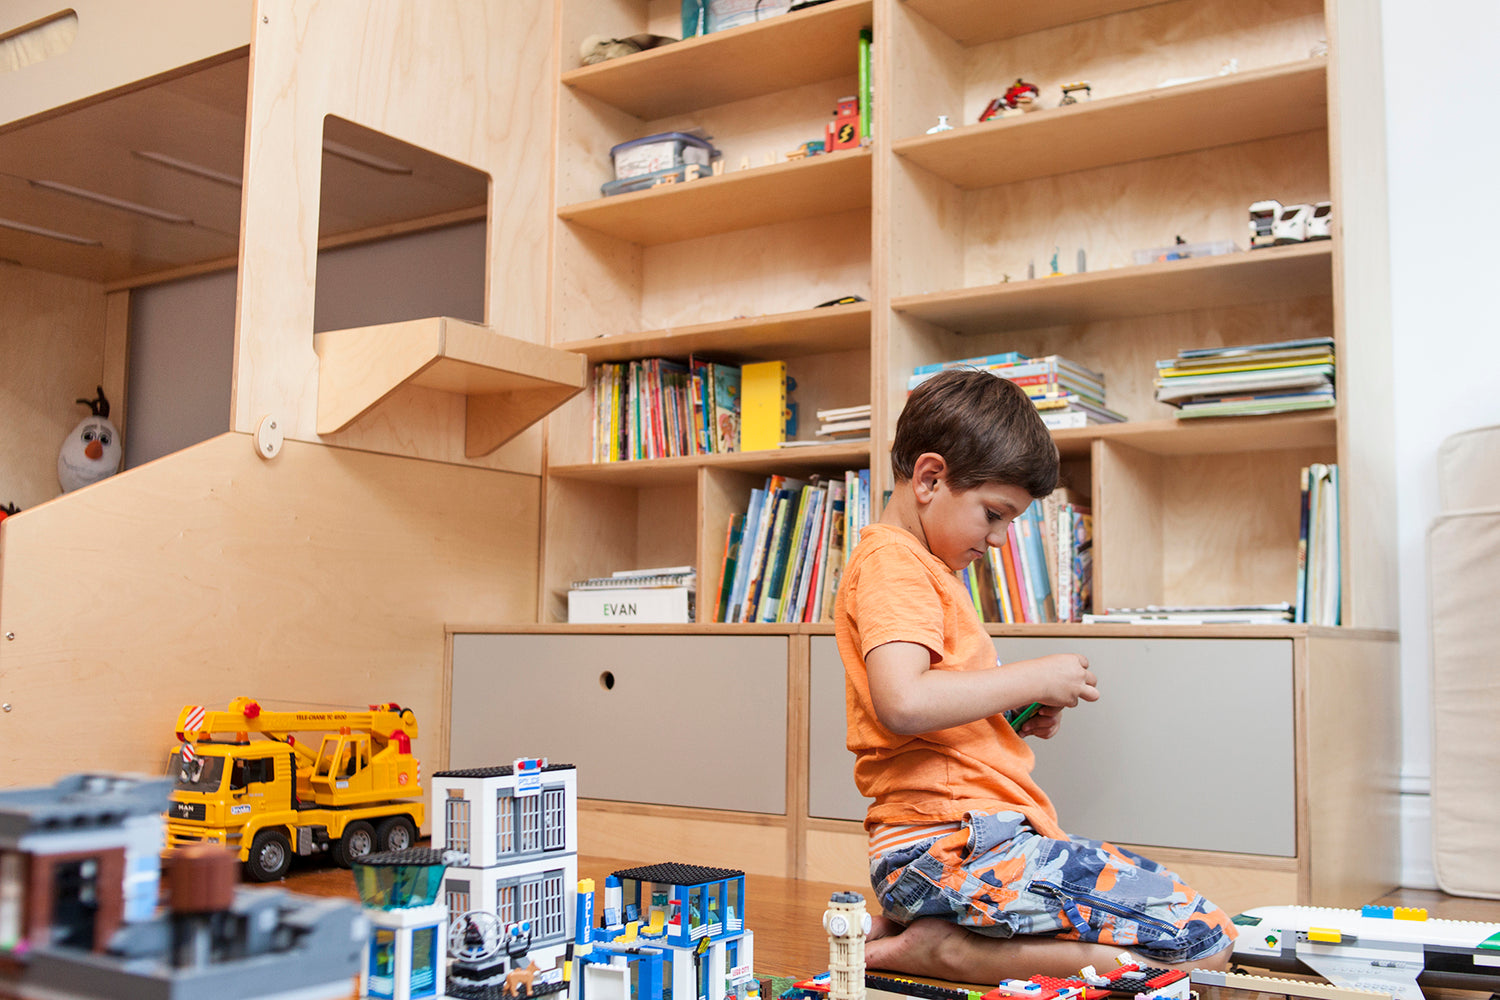 Child in tidy room plays with toys, bookshelves in background.